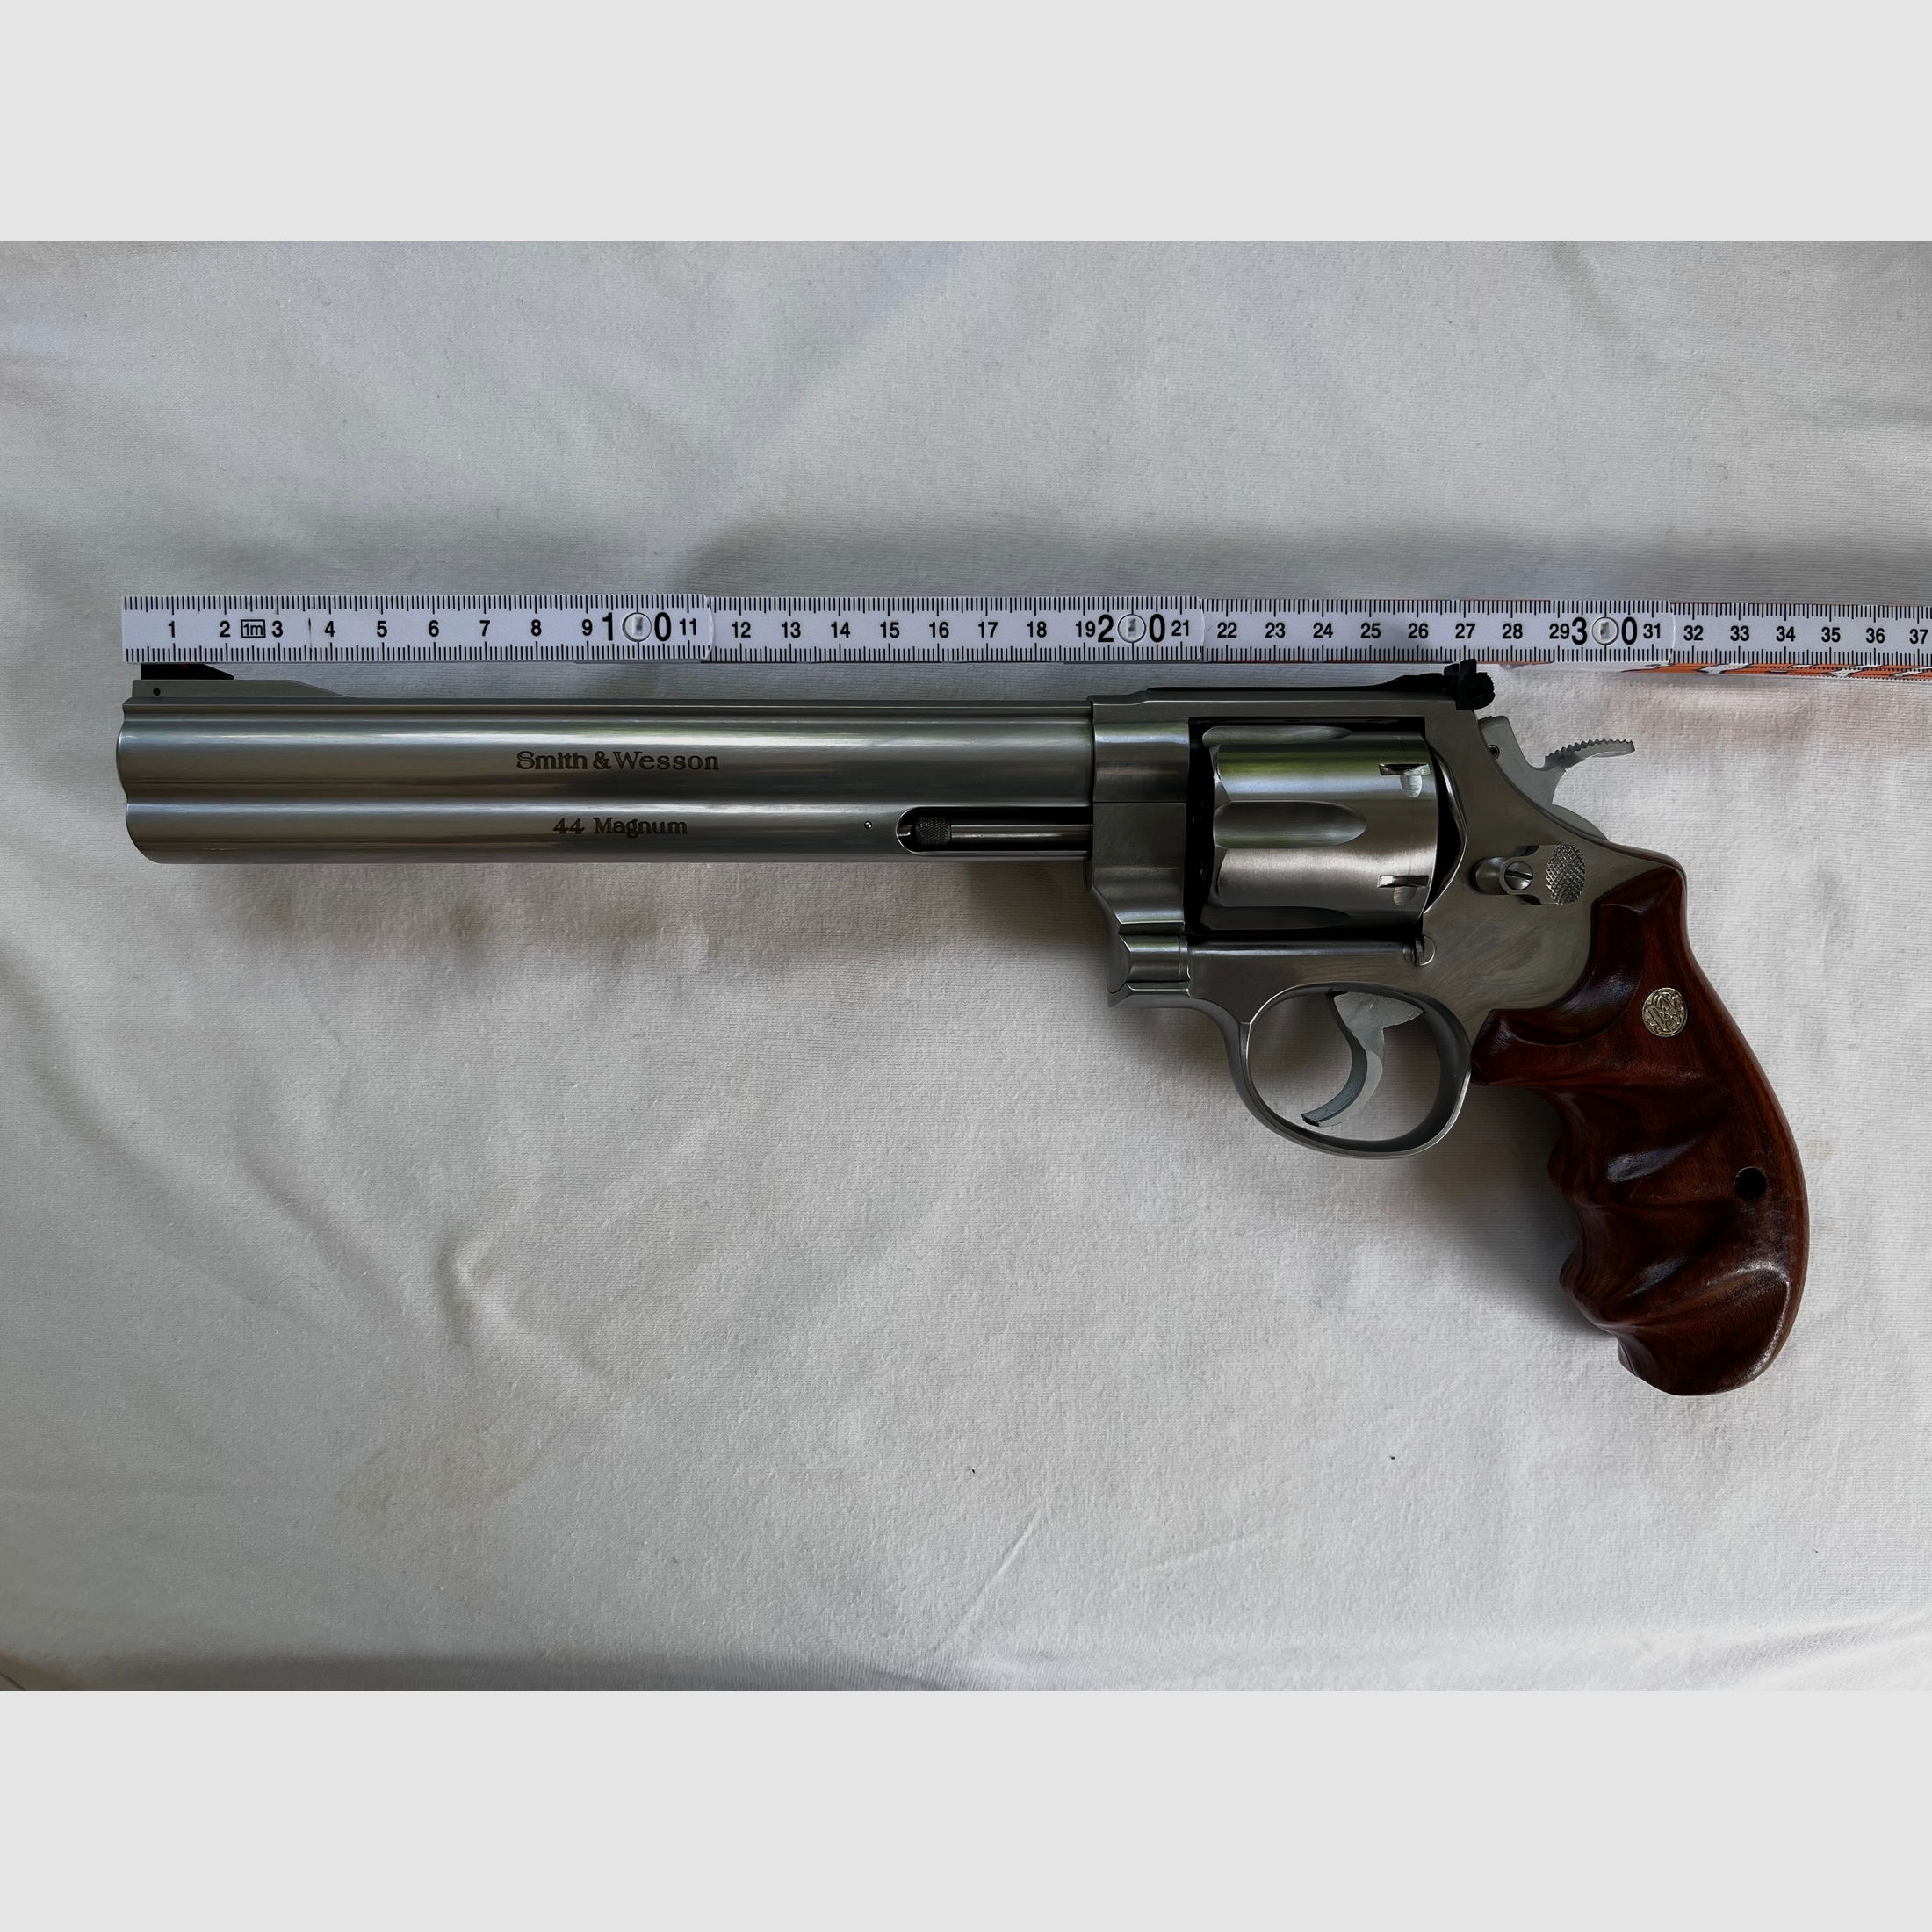 Smith & Wesson S&W 629 Classic  8-3/8"  .44 Magnum